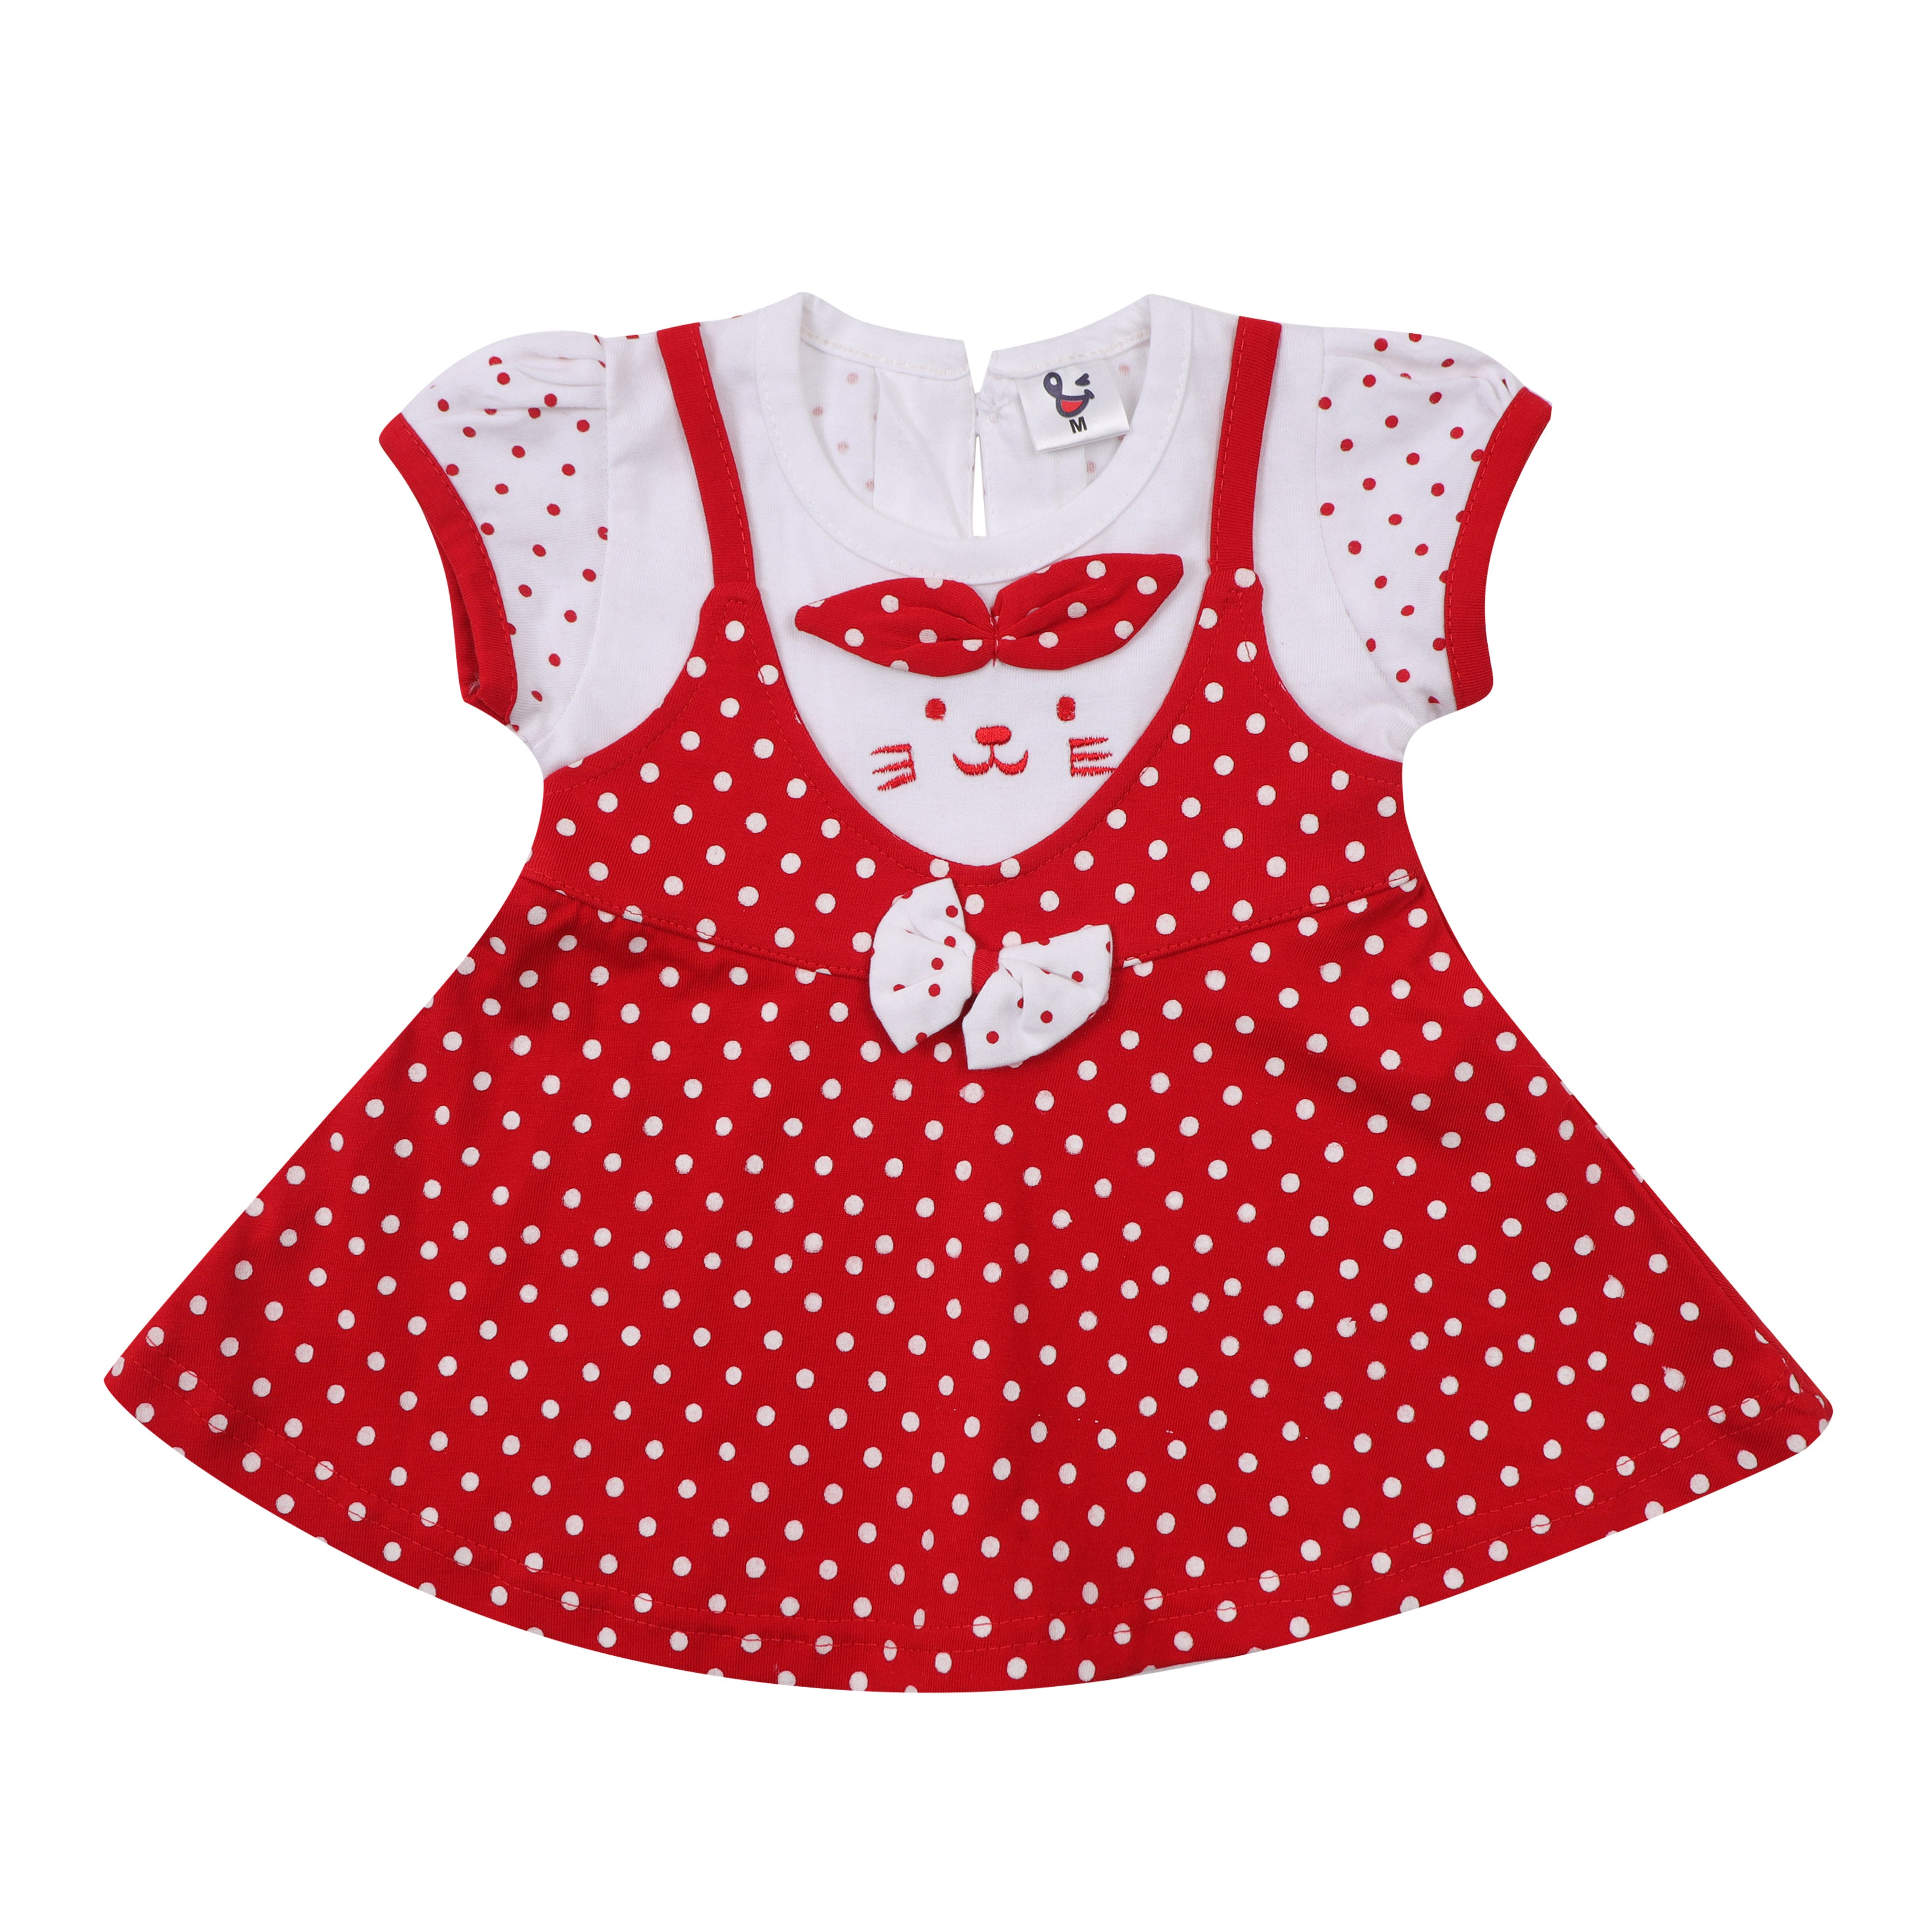 Nammababy Girls Above Knee Casual Dress